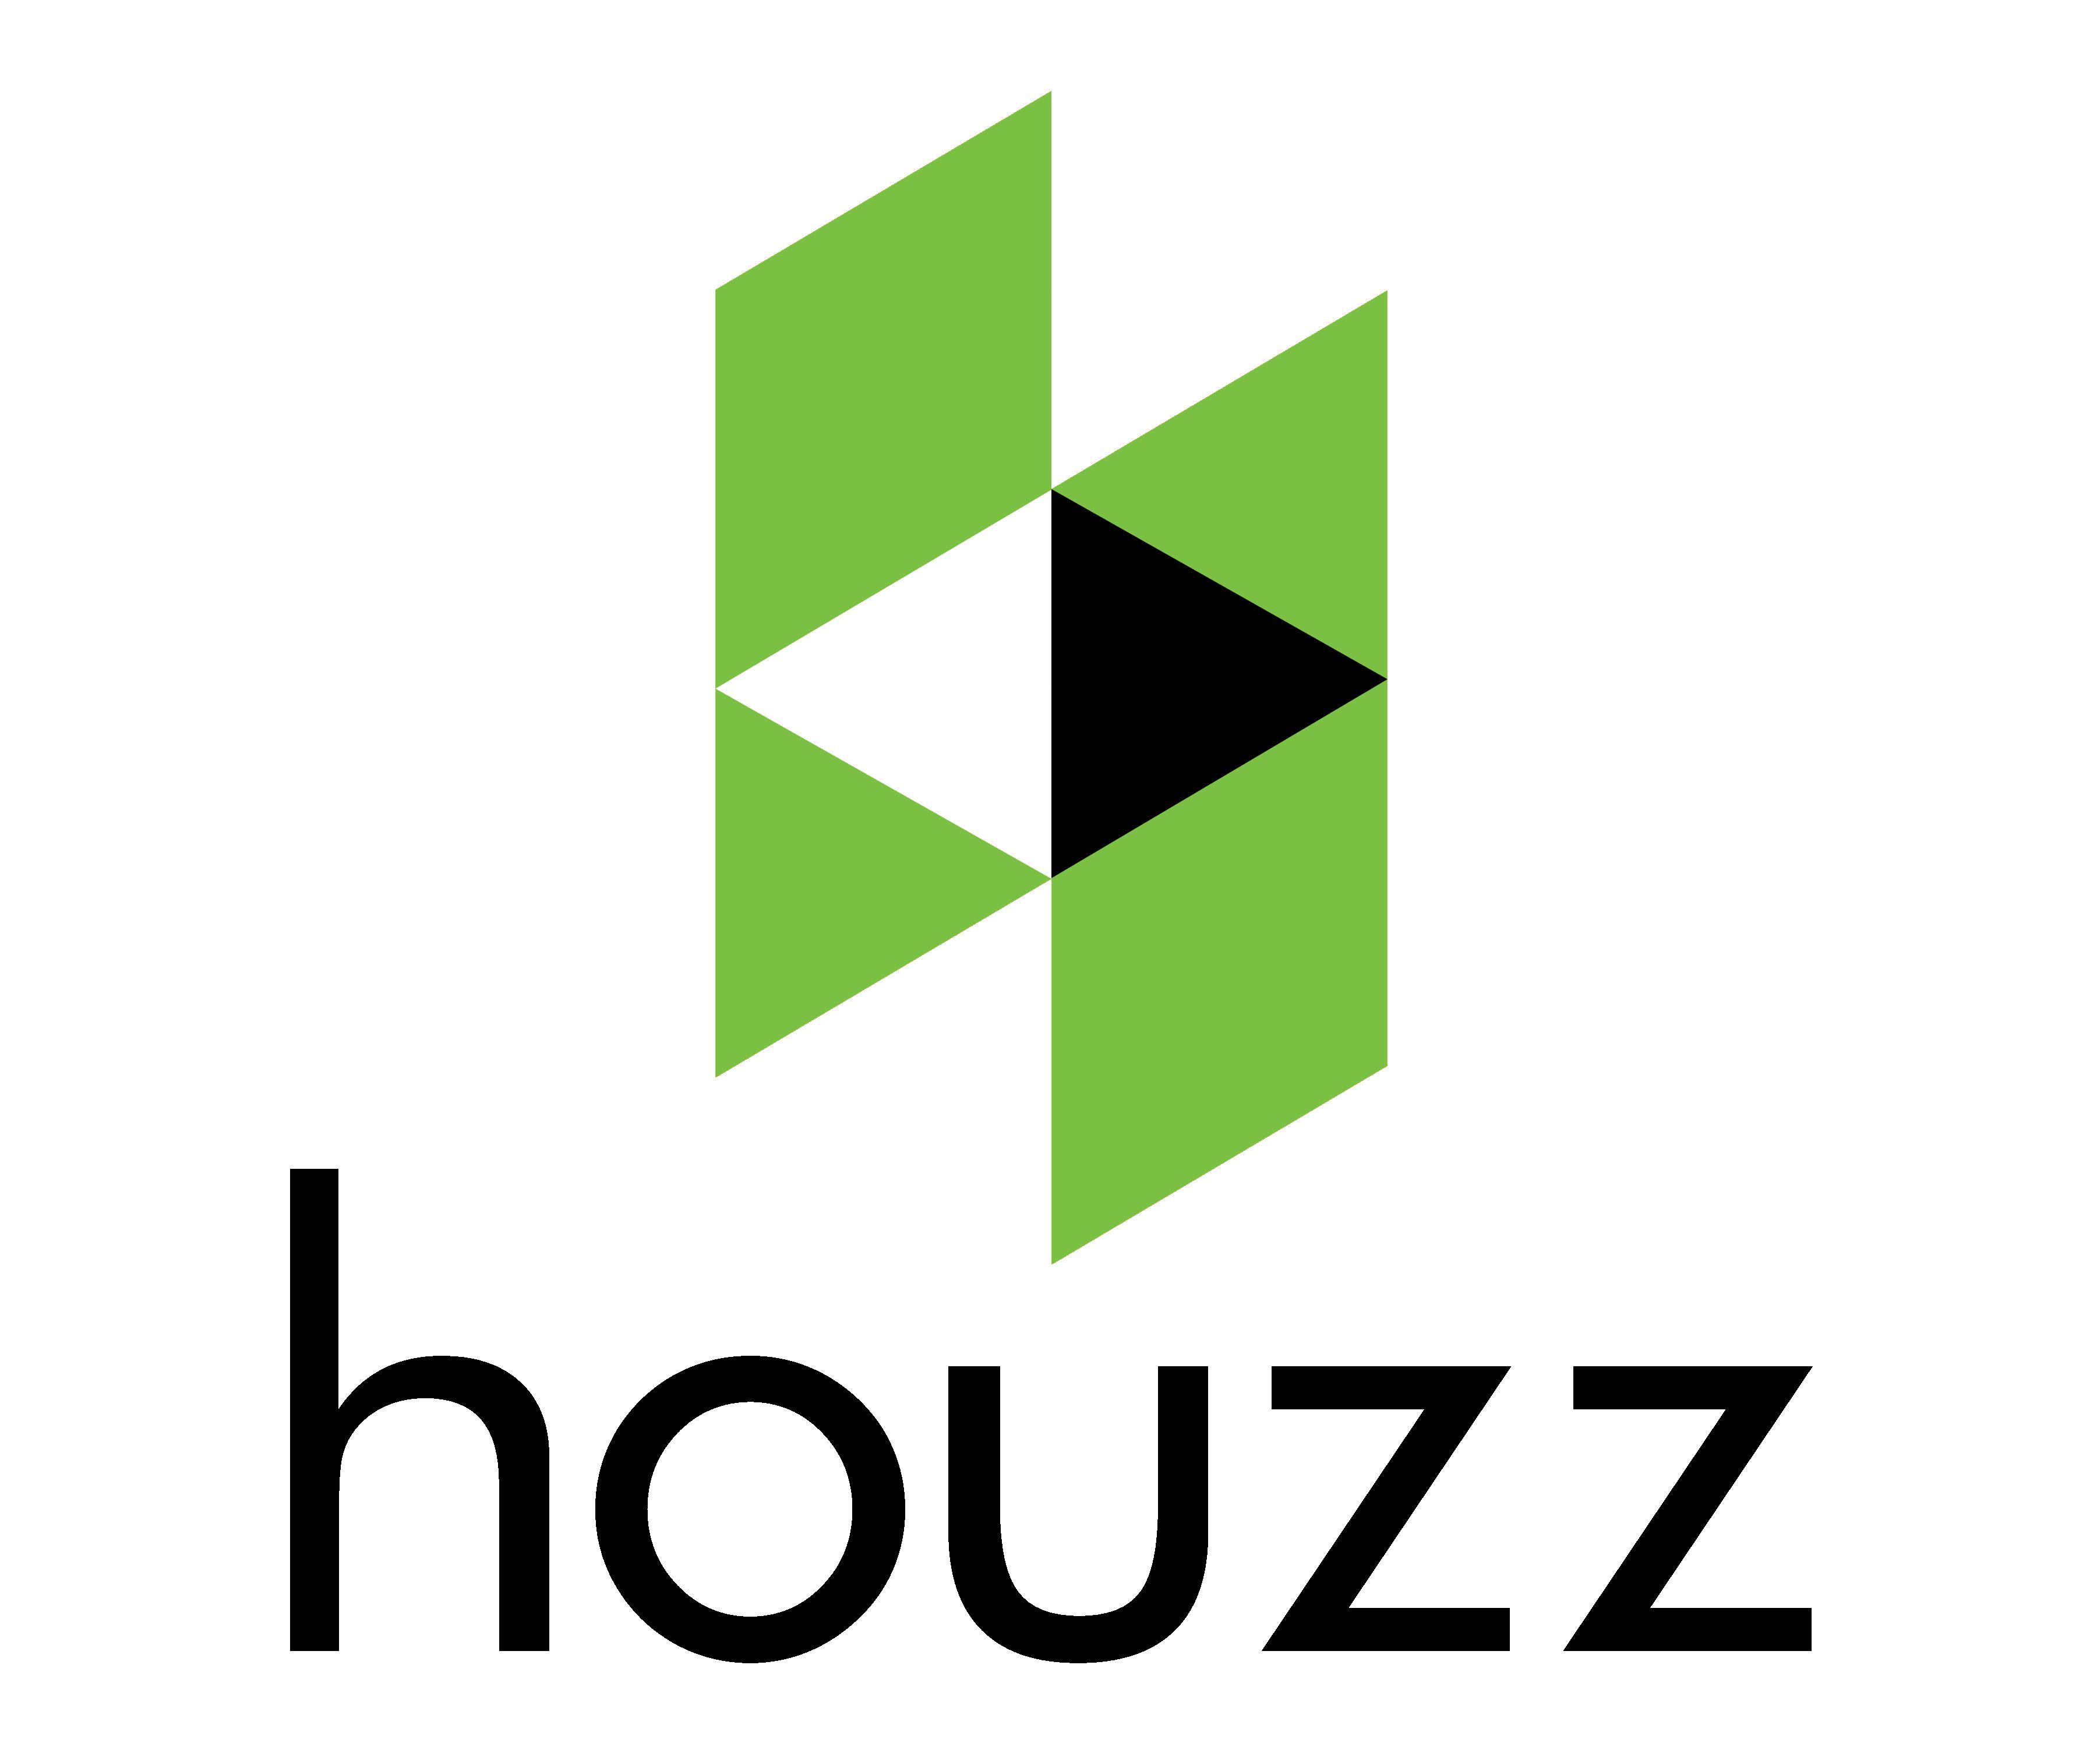 With Two Zz Logo - Houzz Logo, Houzz Symbol, Meaning, History and Evolution